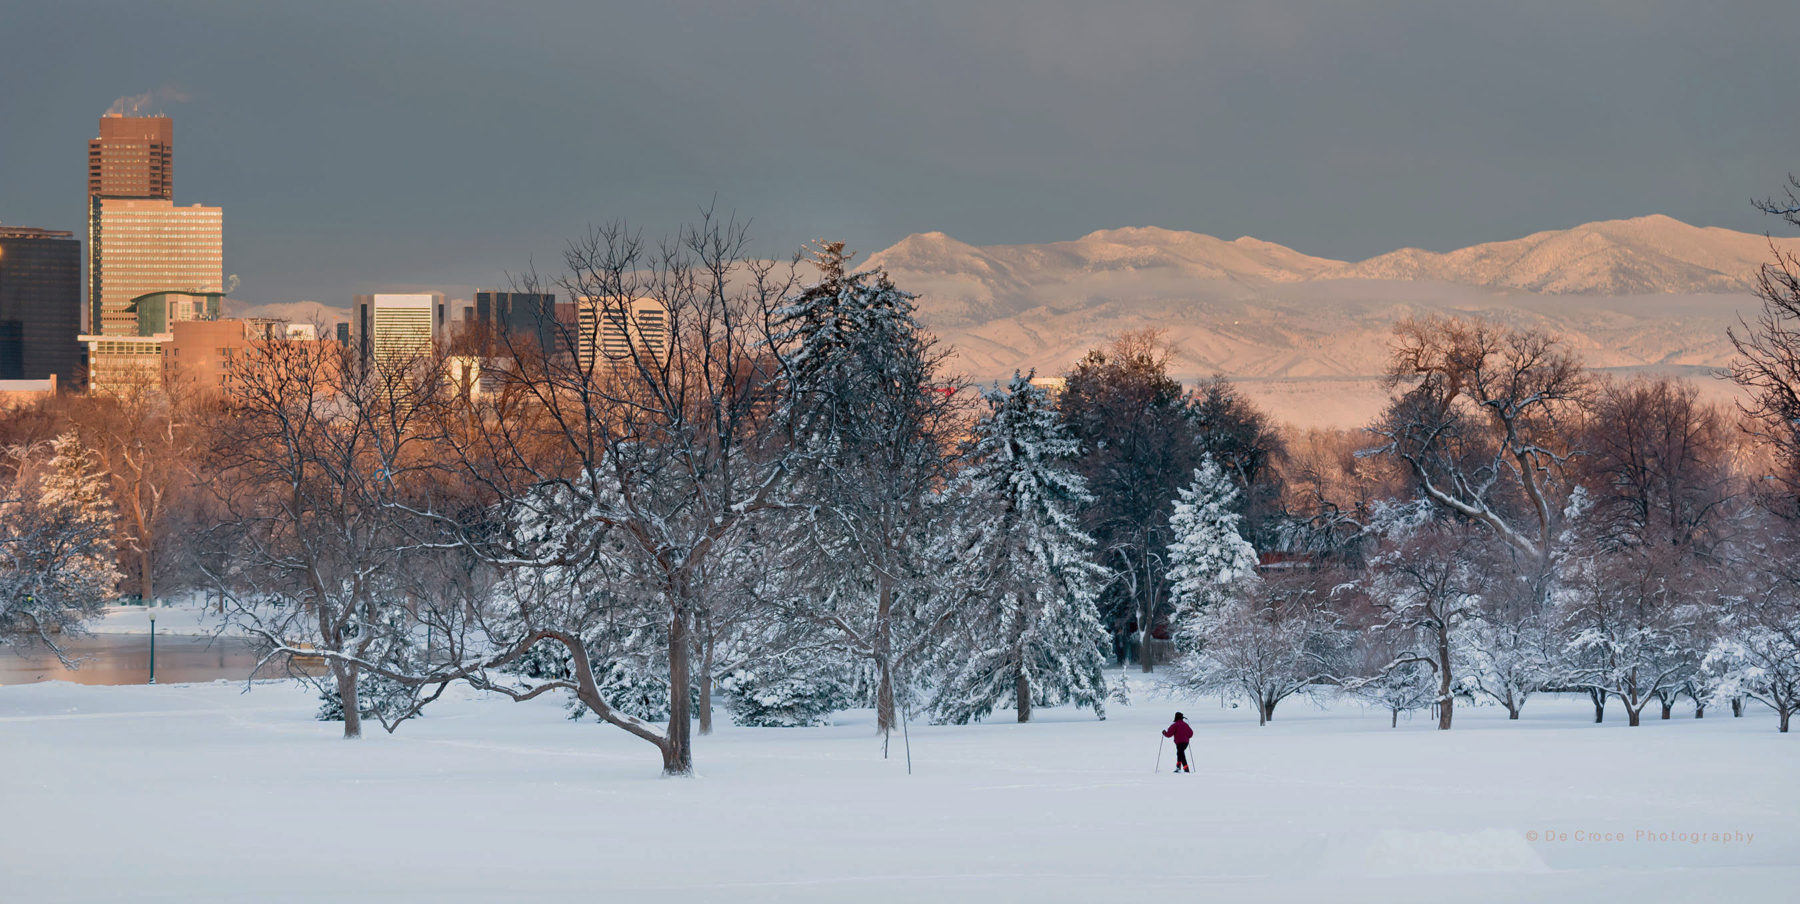 Denver Photographer captures perfect scene of Denver office towers snow covered Rocky mountains and nordic skier in park after giant March snowfall.